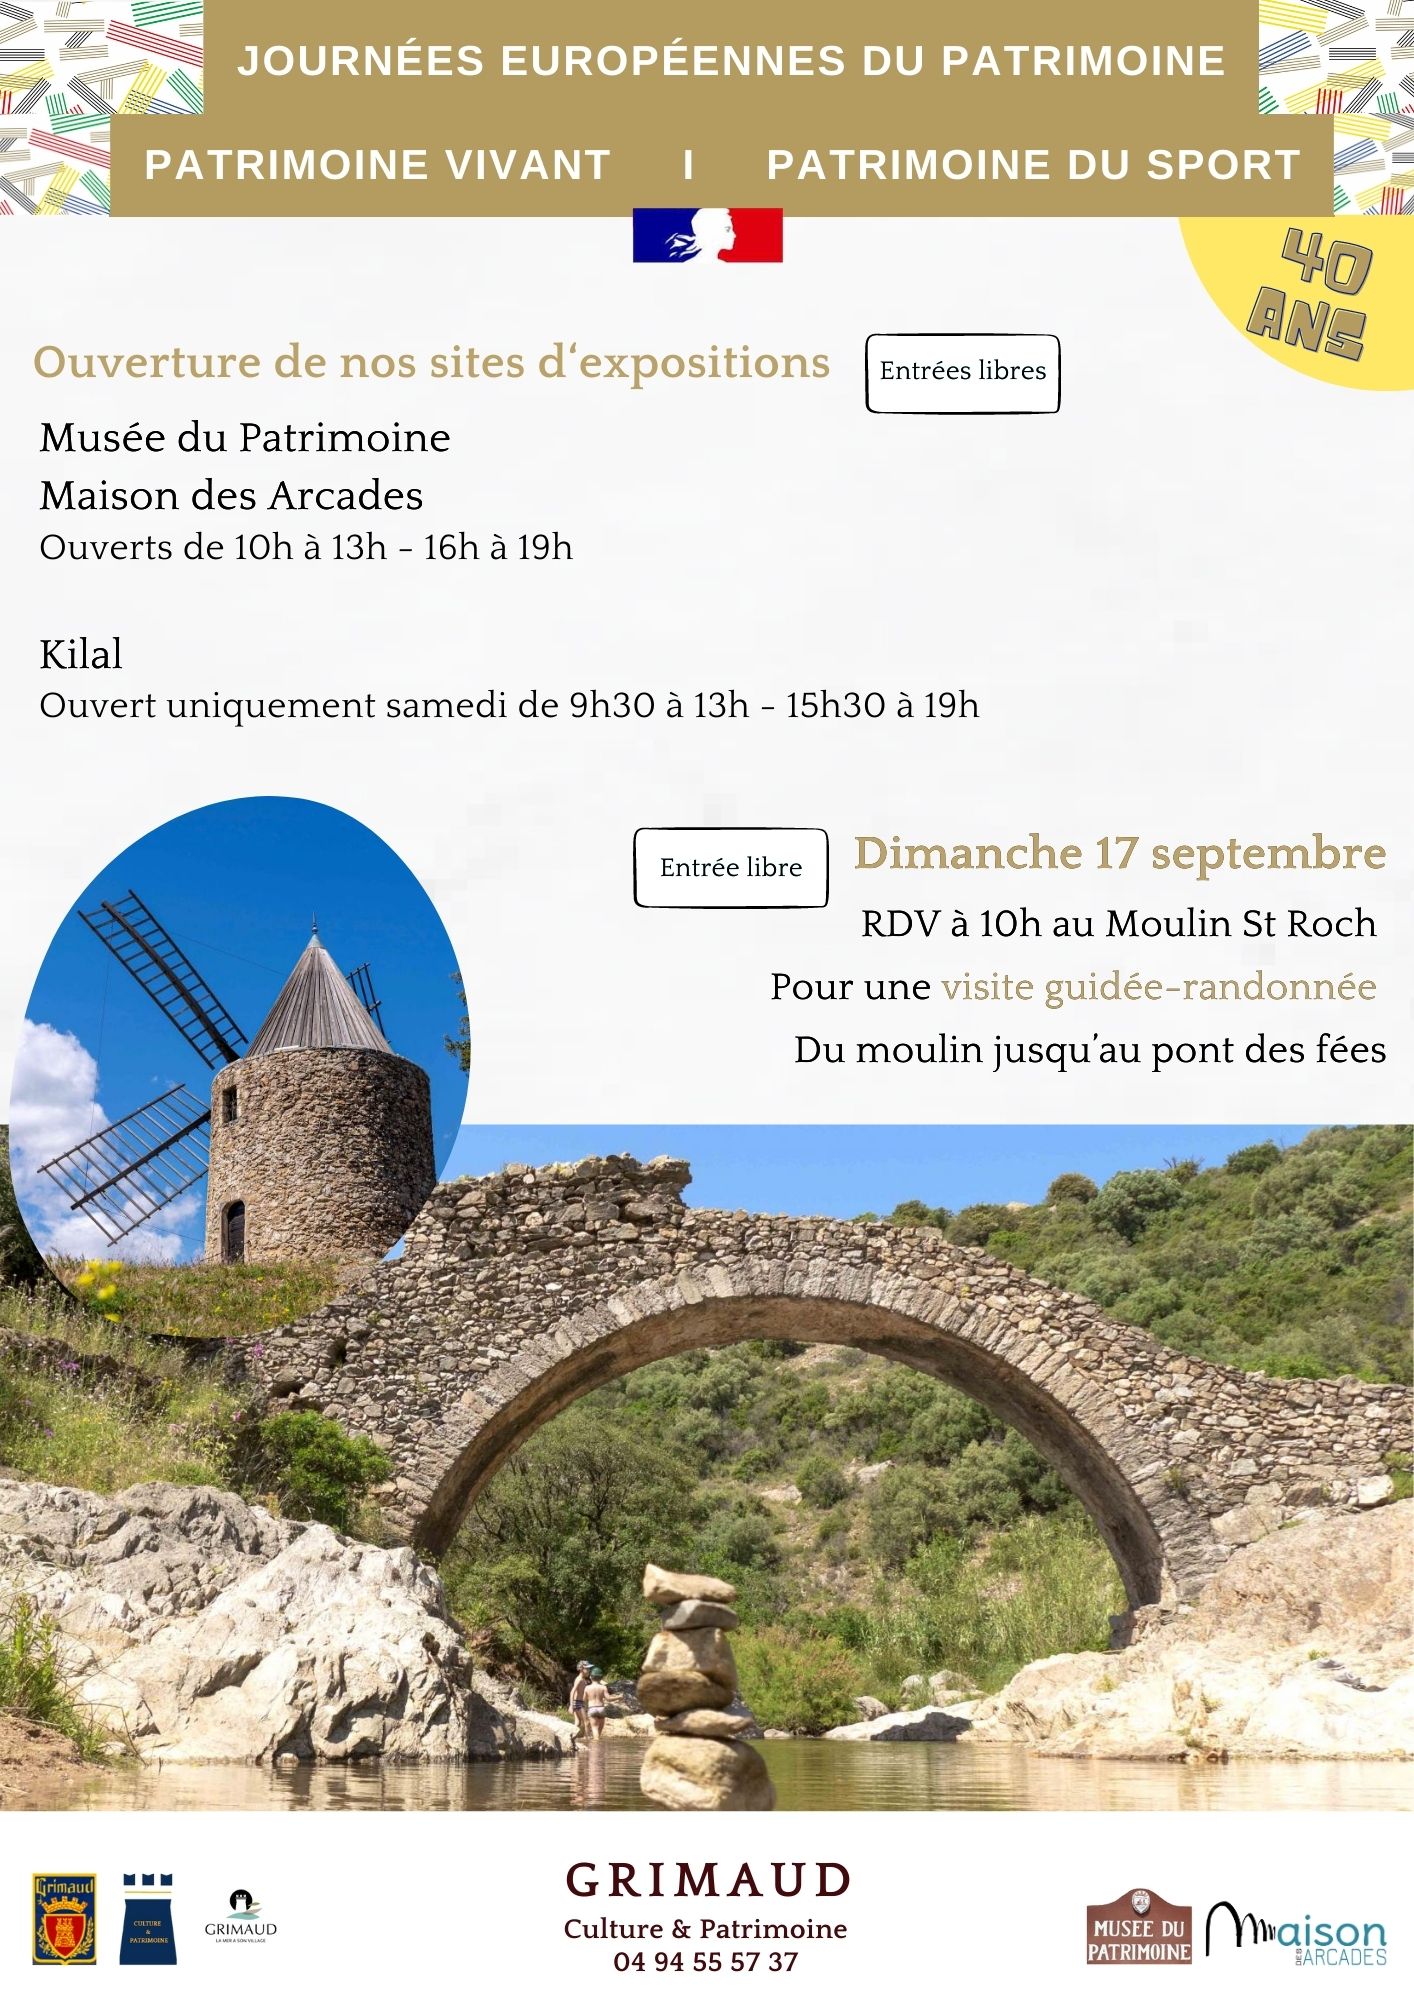 From September 16 to 17, 2023 - European Heritage Days